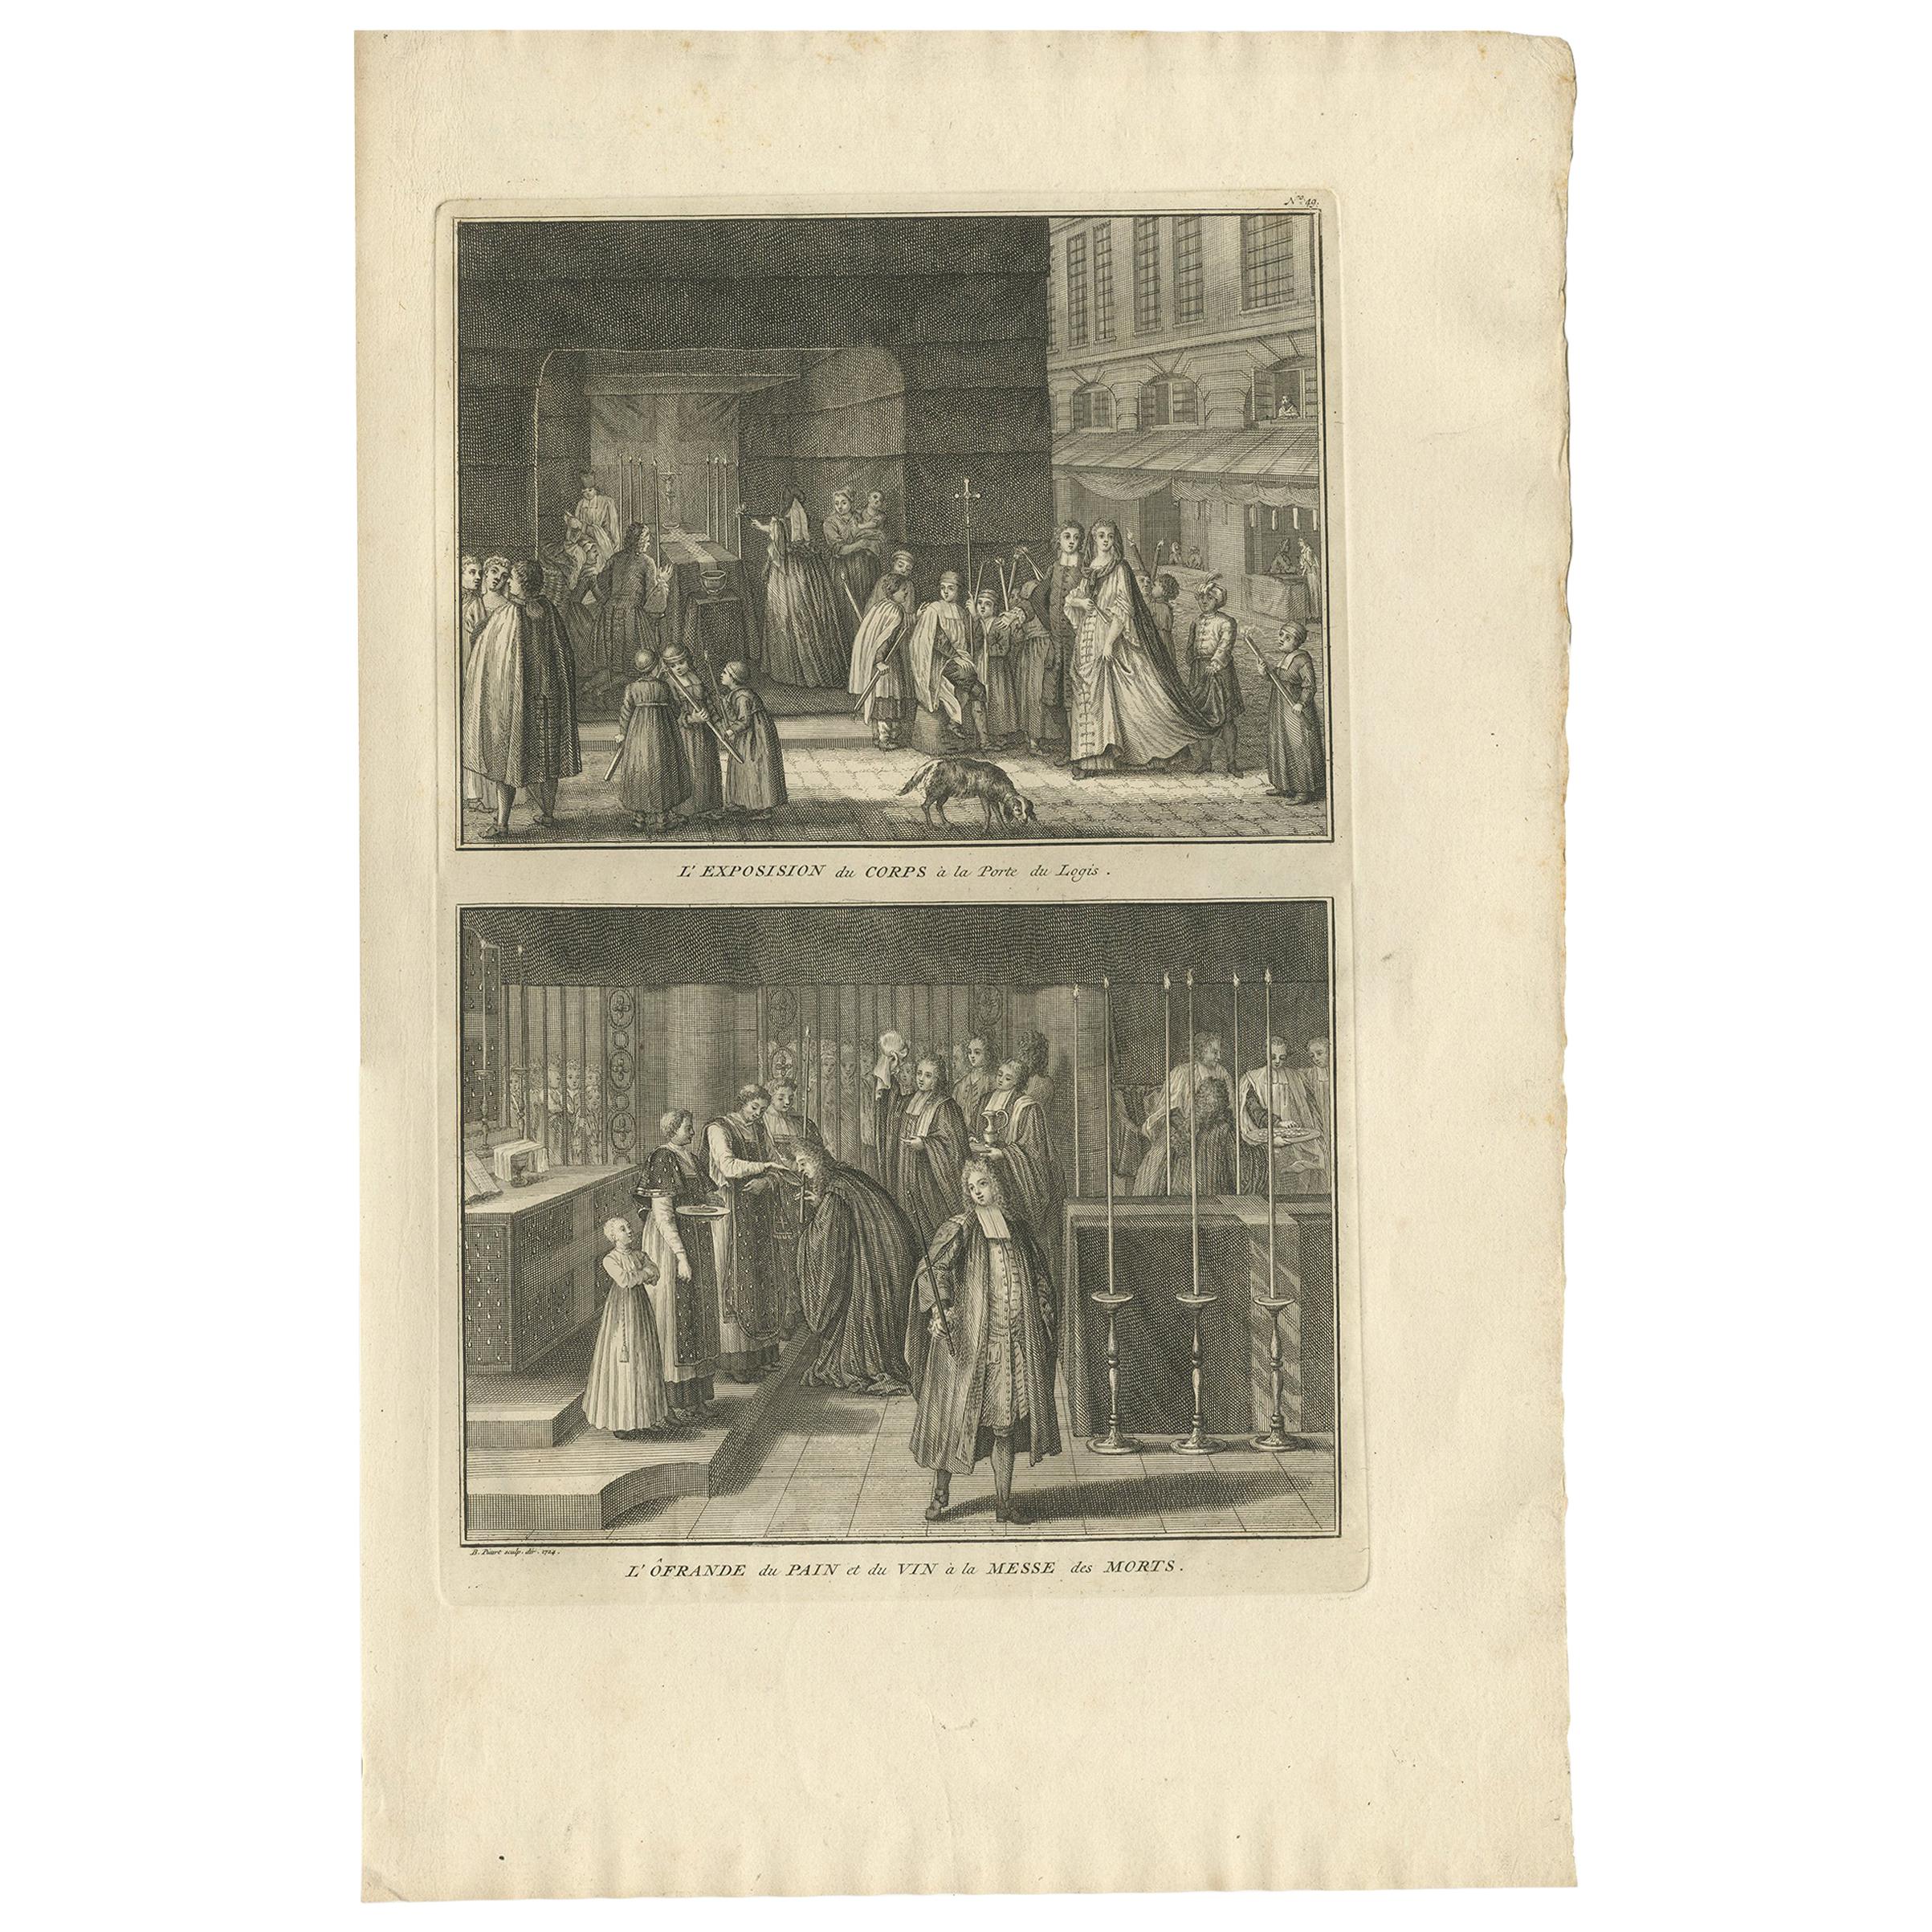 Antique Print of a Funeral Procession by Picart, circa 1725